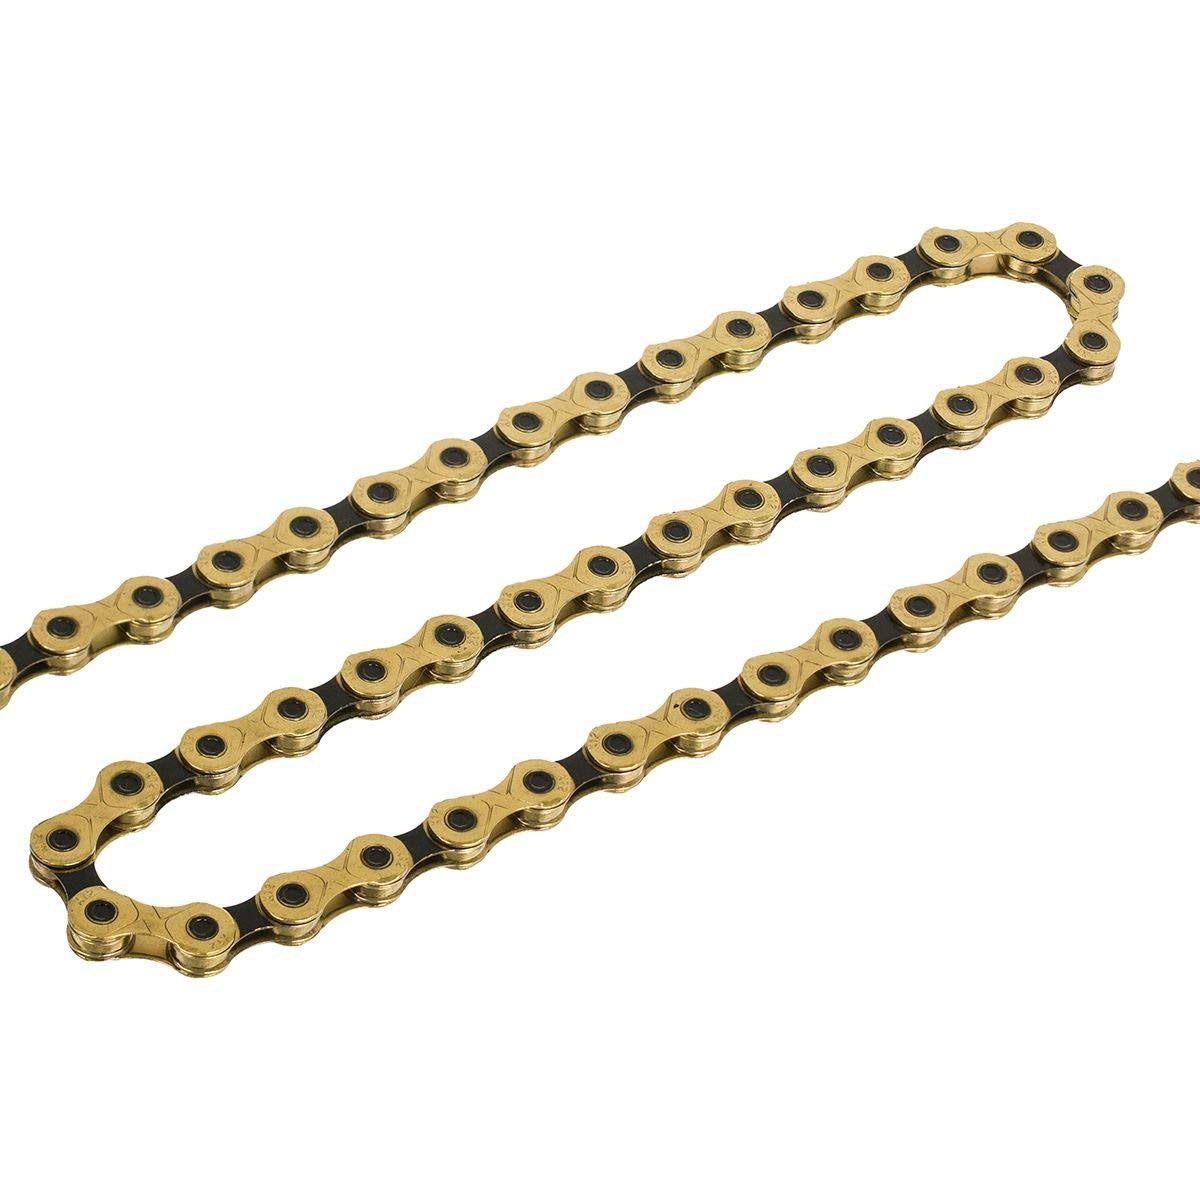 KMC X12 Chain - Gold and Black 126 Links, 12 Speed